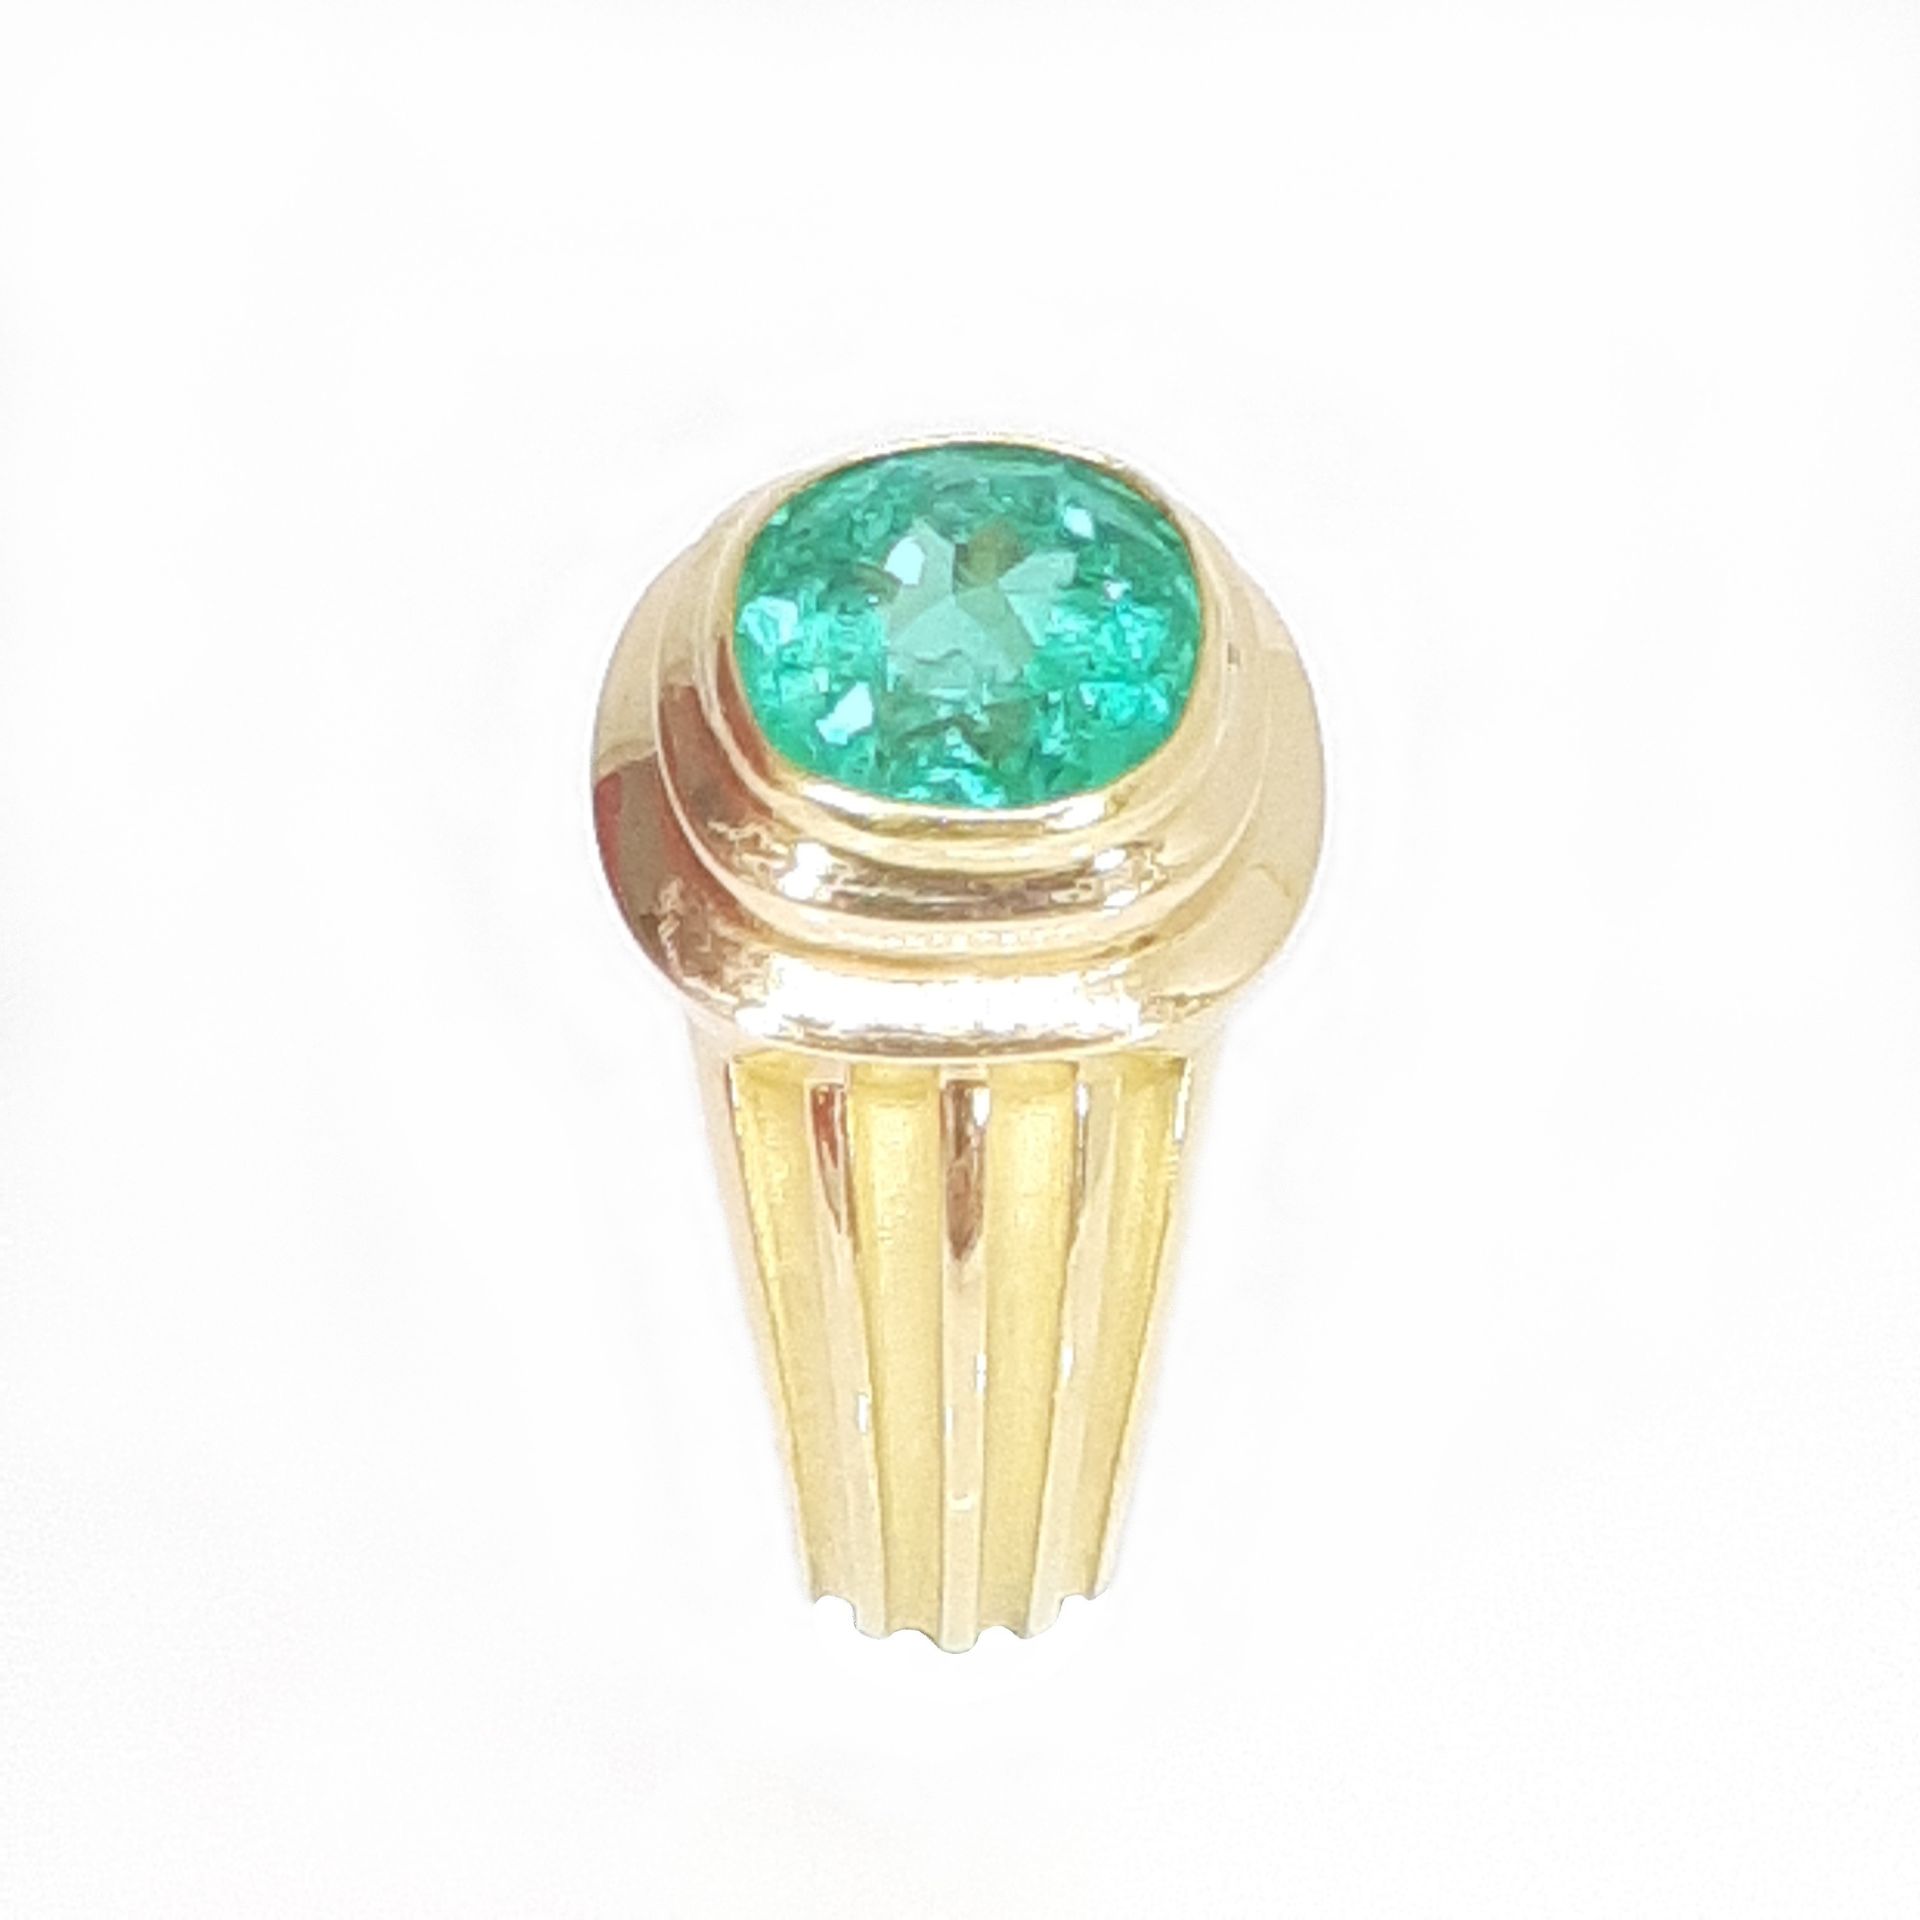 Bague émeraude 6.67 cts - Colombie EMERALD RING inspired by René Boivin - Main e&hellip;